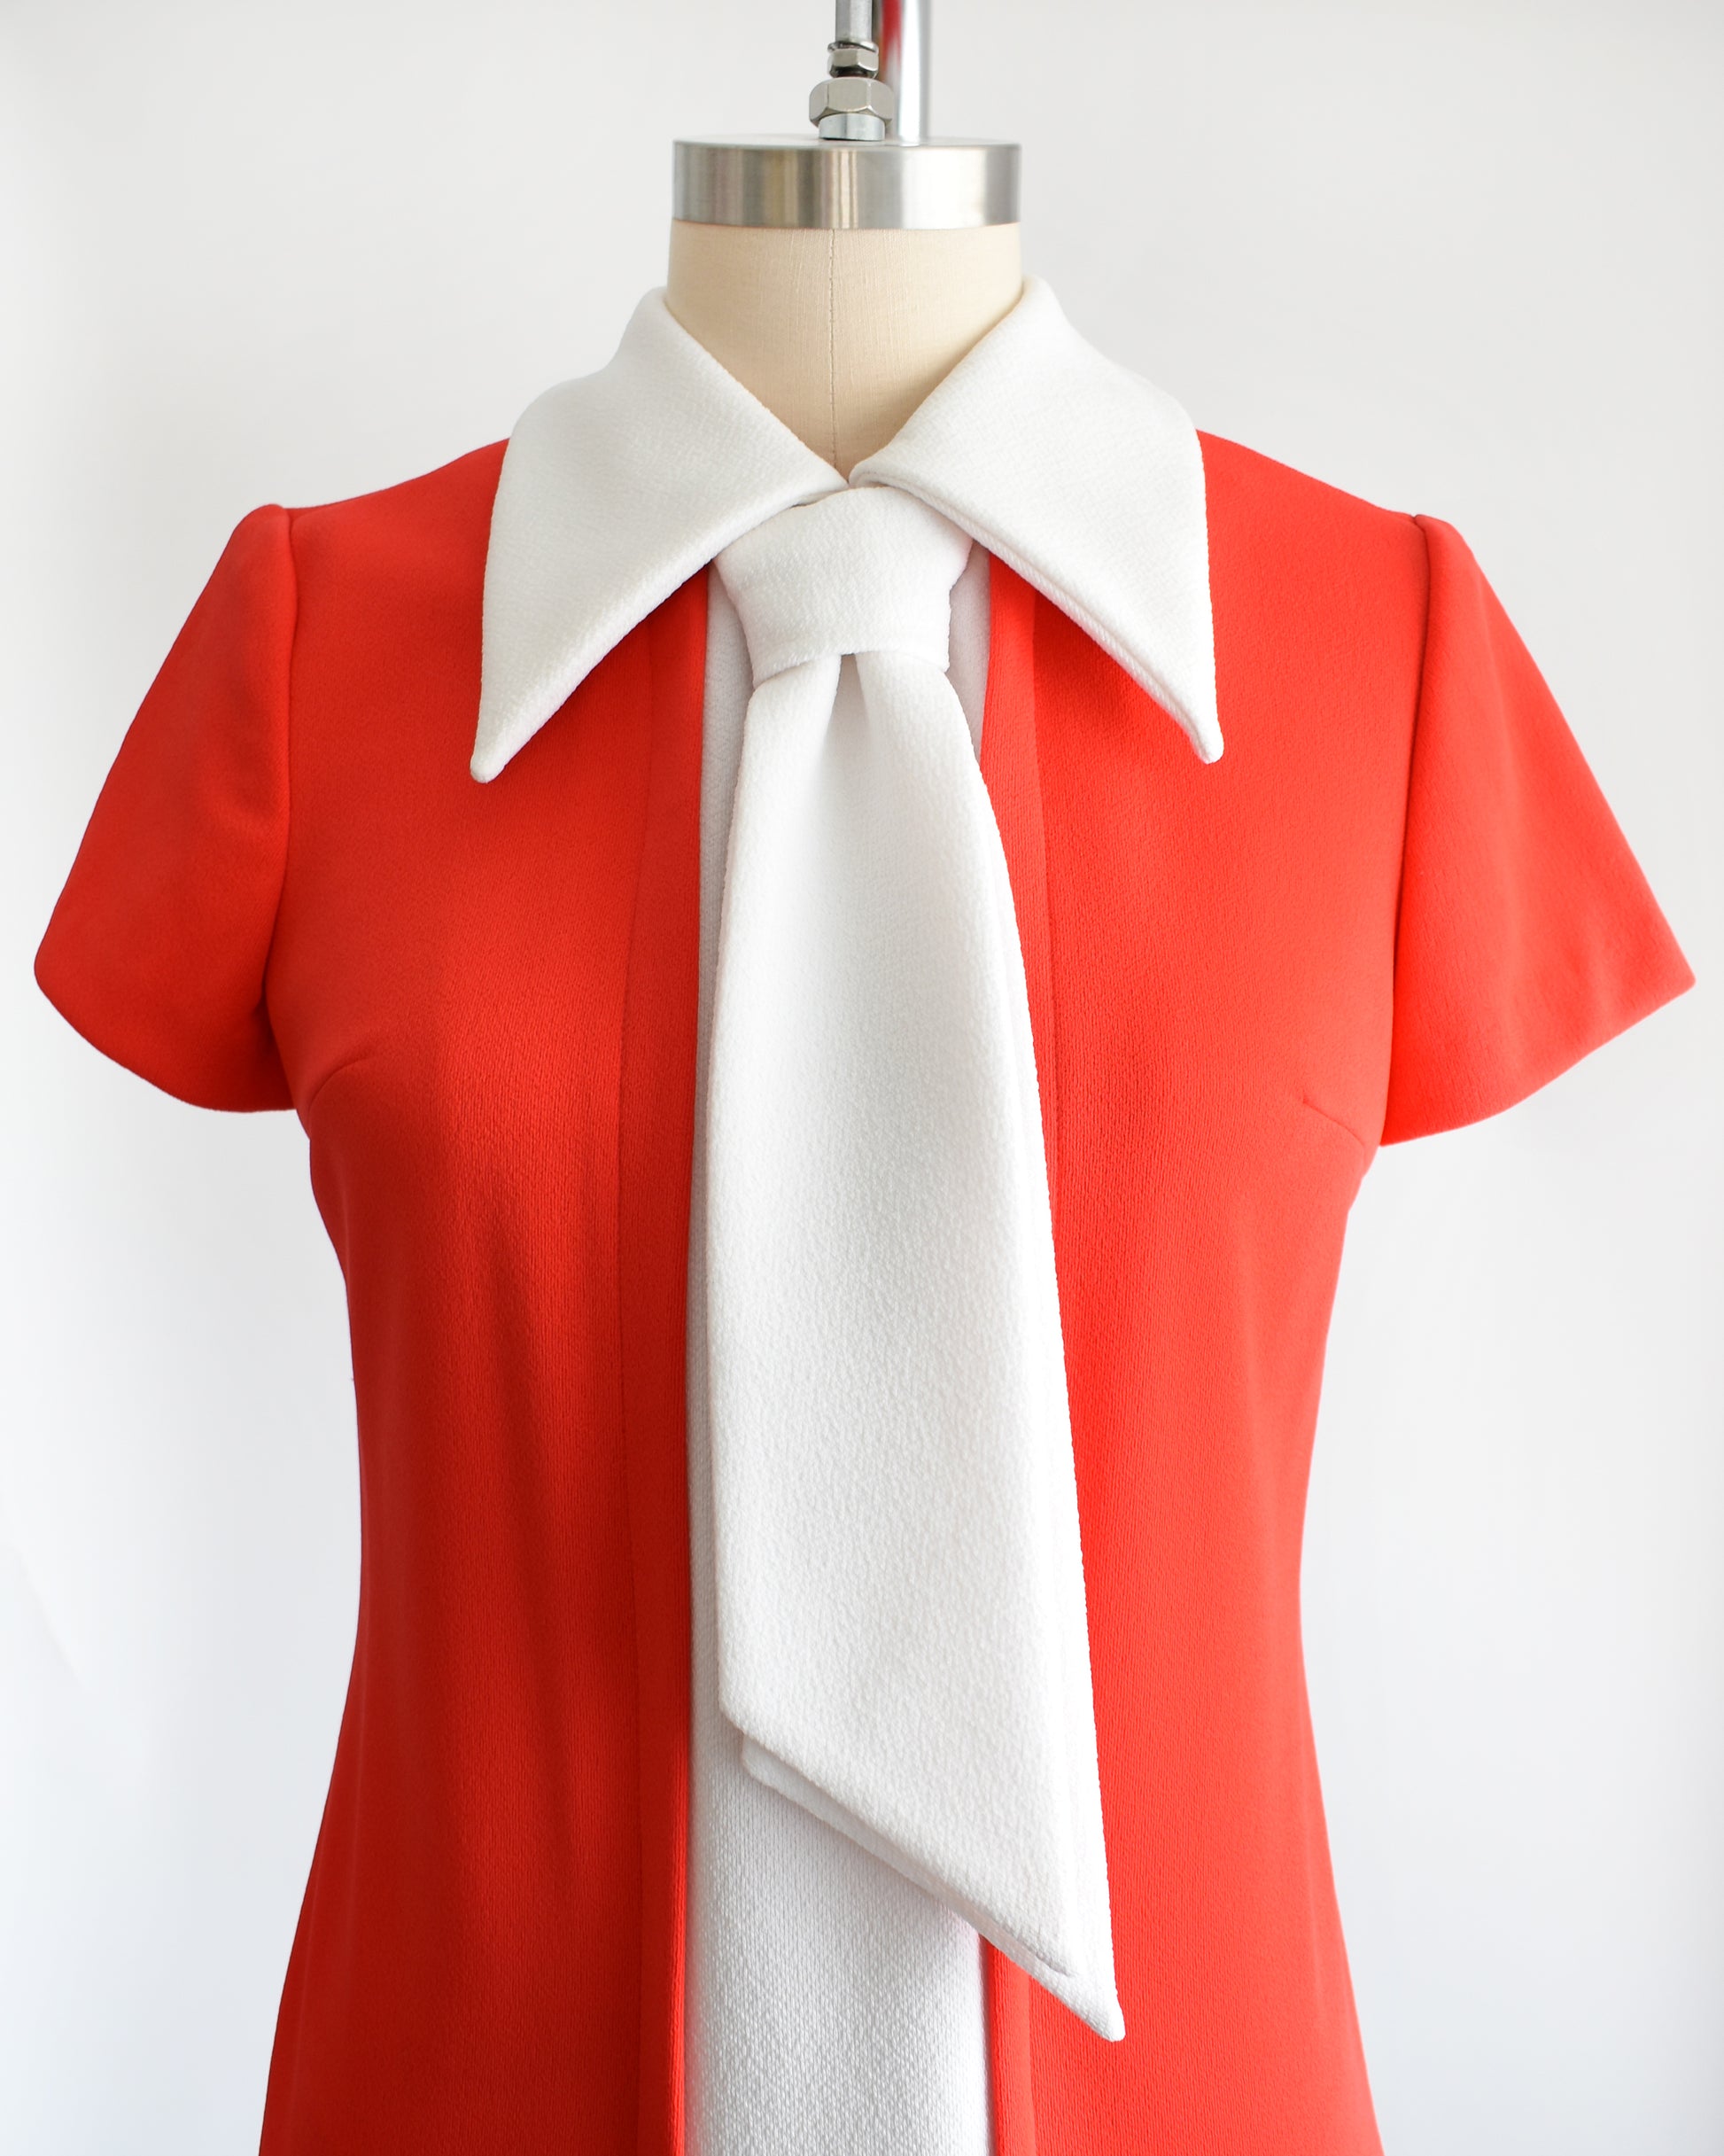 Close up of the red bodice that features a white collared neckline and ascot tie